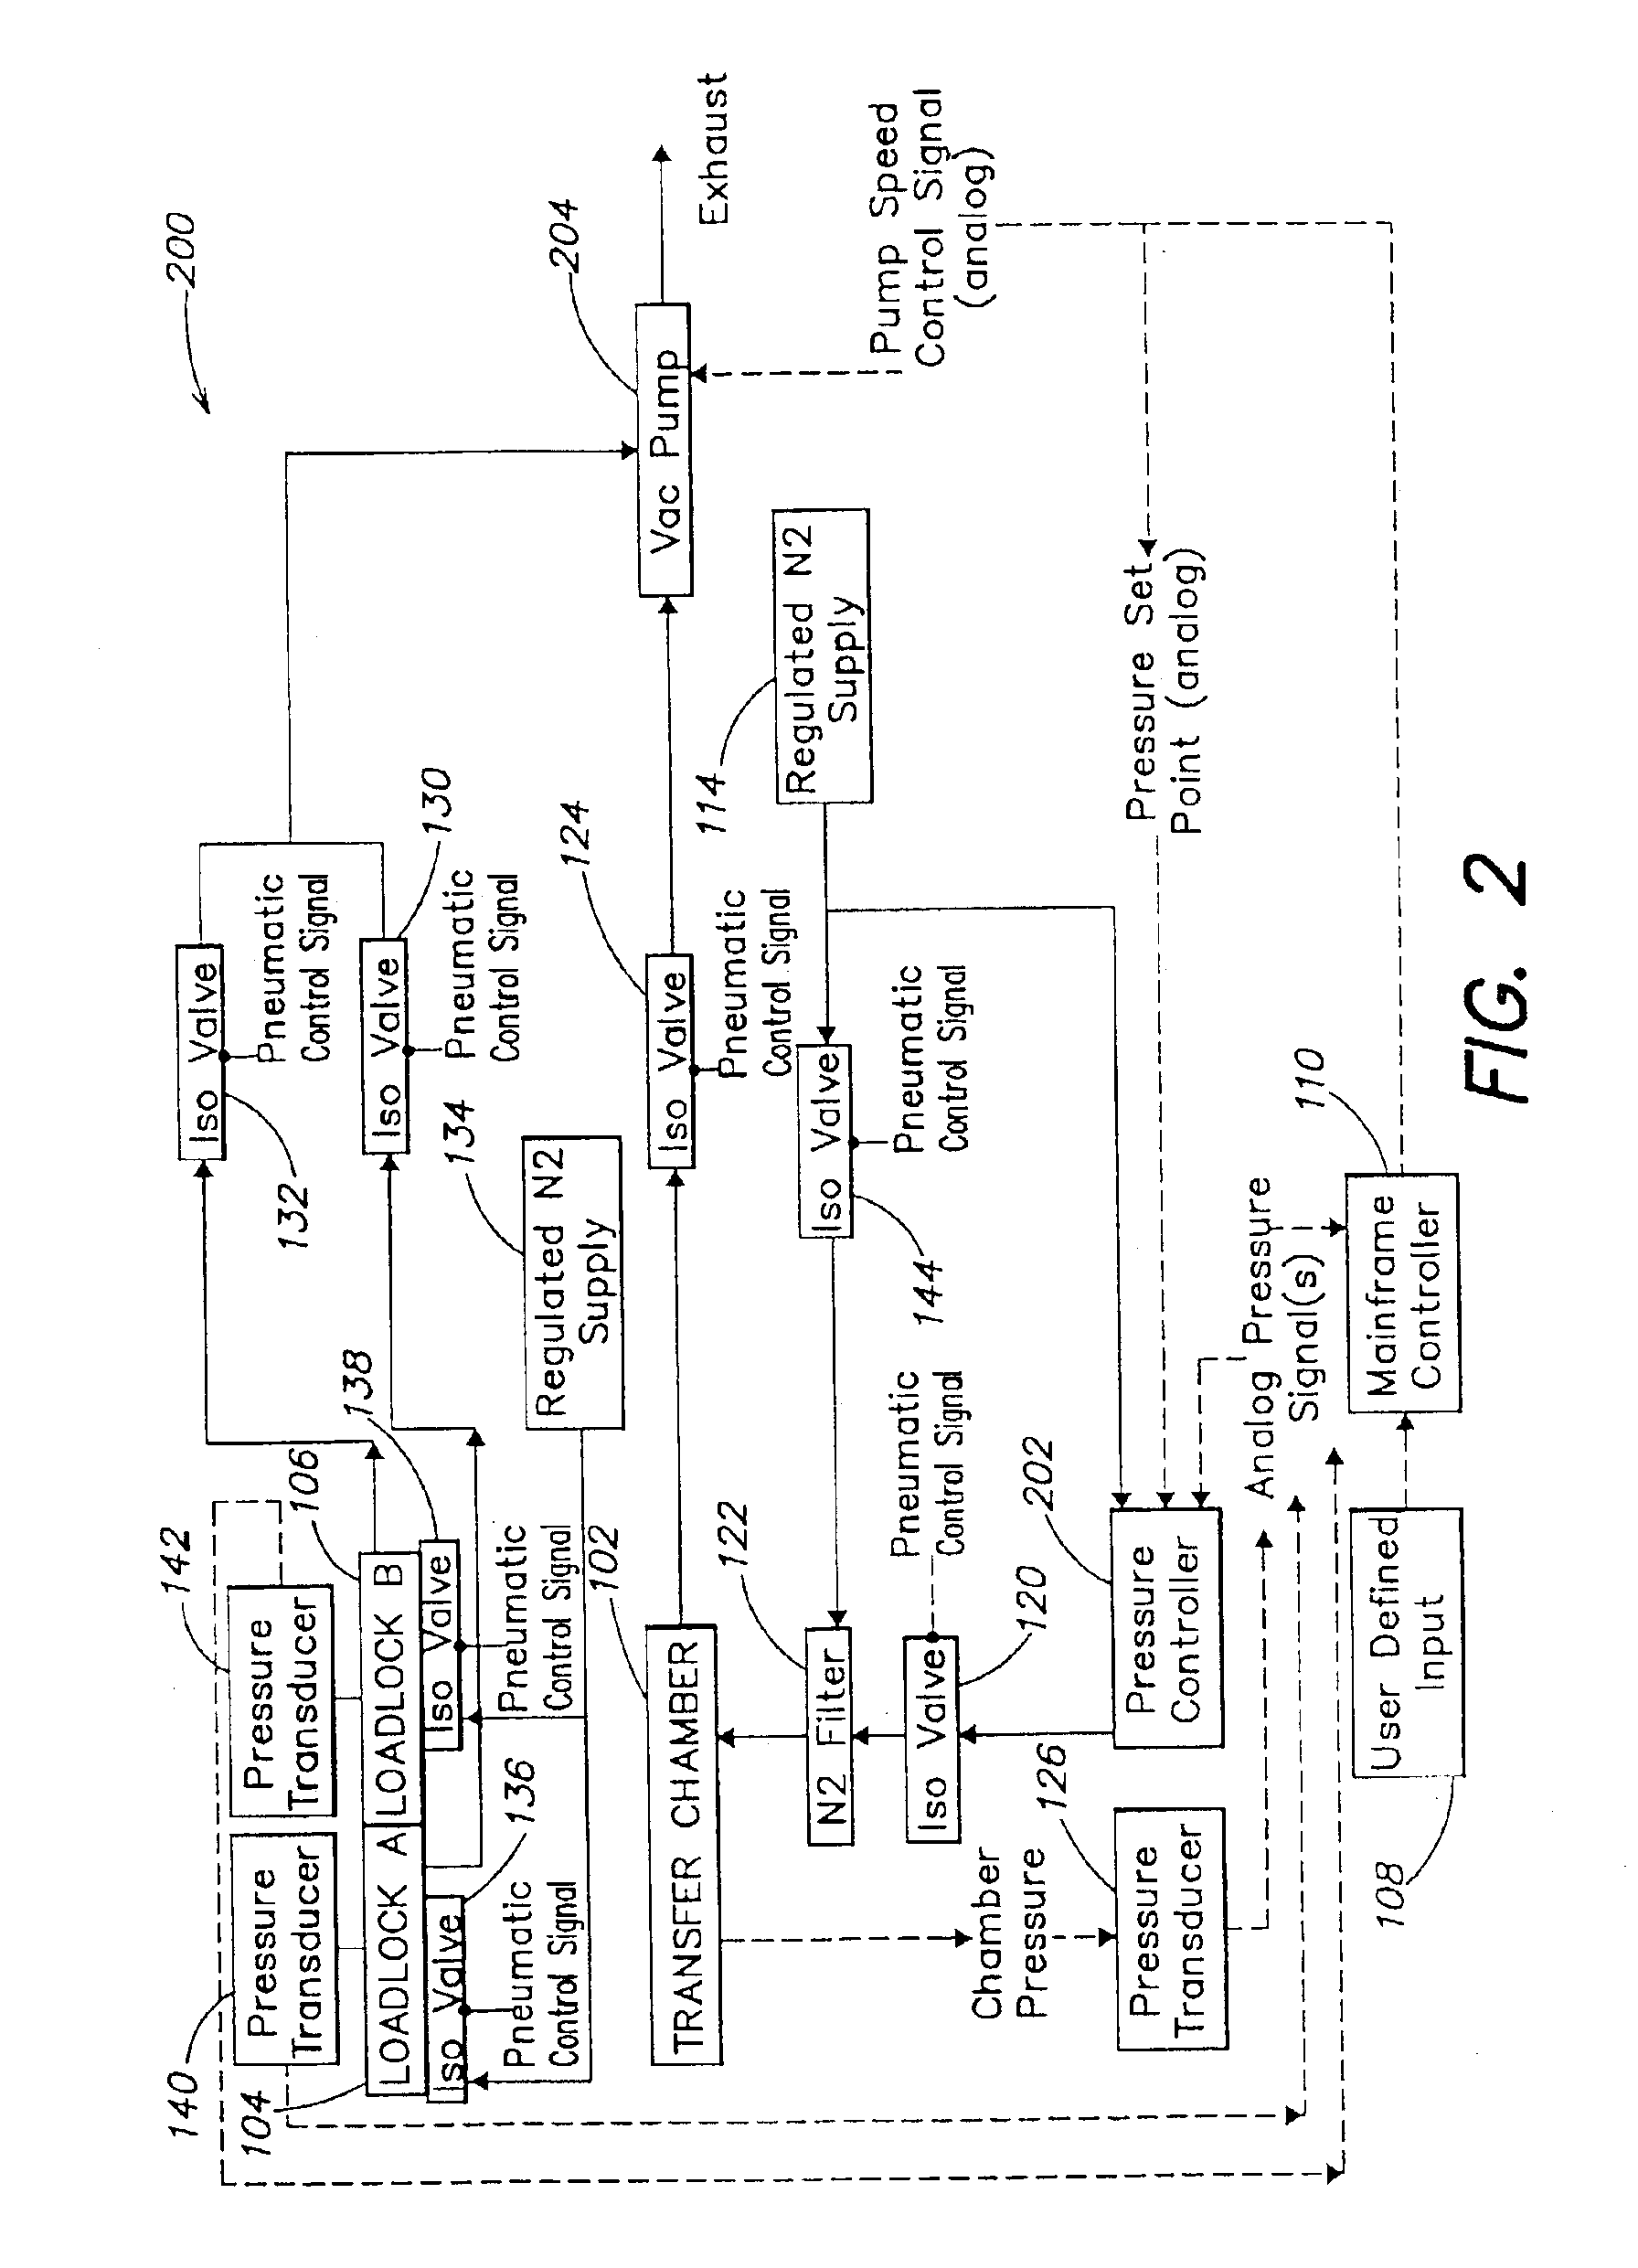 Methods and apparatus for maintaining a pressure within an environmentally controlled chamber